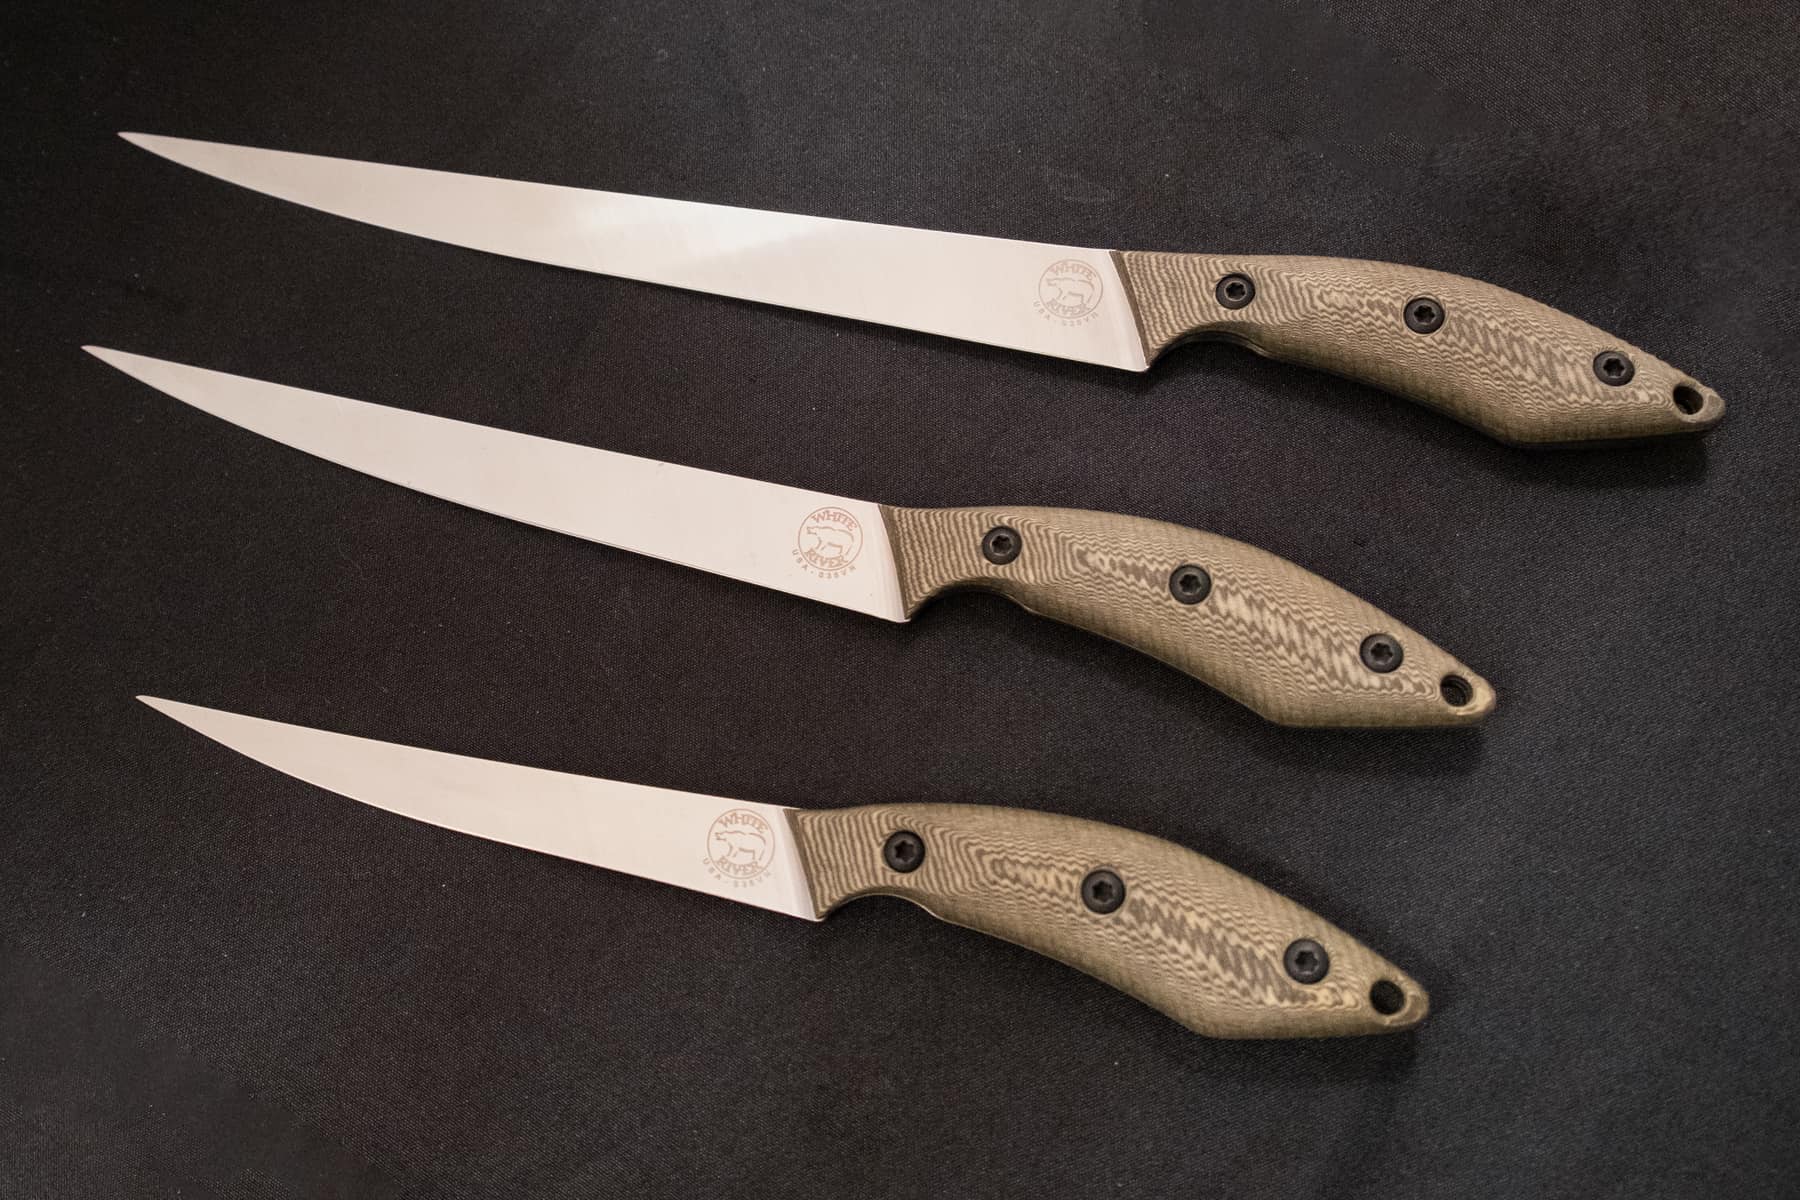 White RIver Knives Fillet Knives will be available in 6 inch, 8 inch, and 10 inch sizes. 